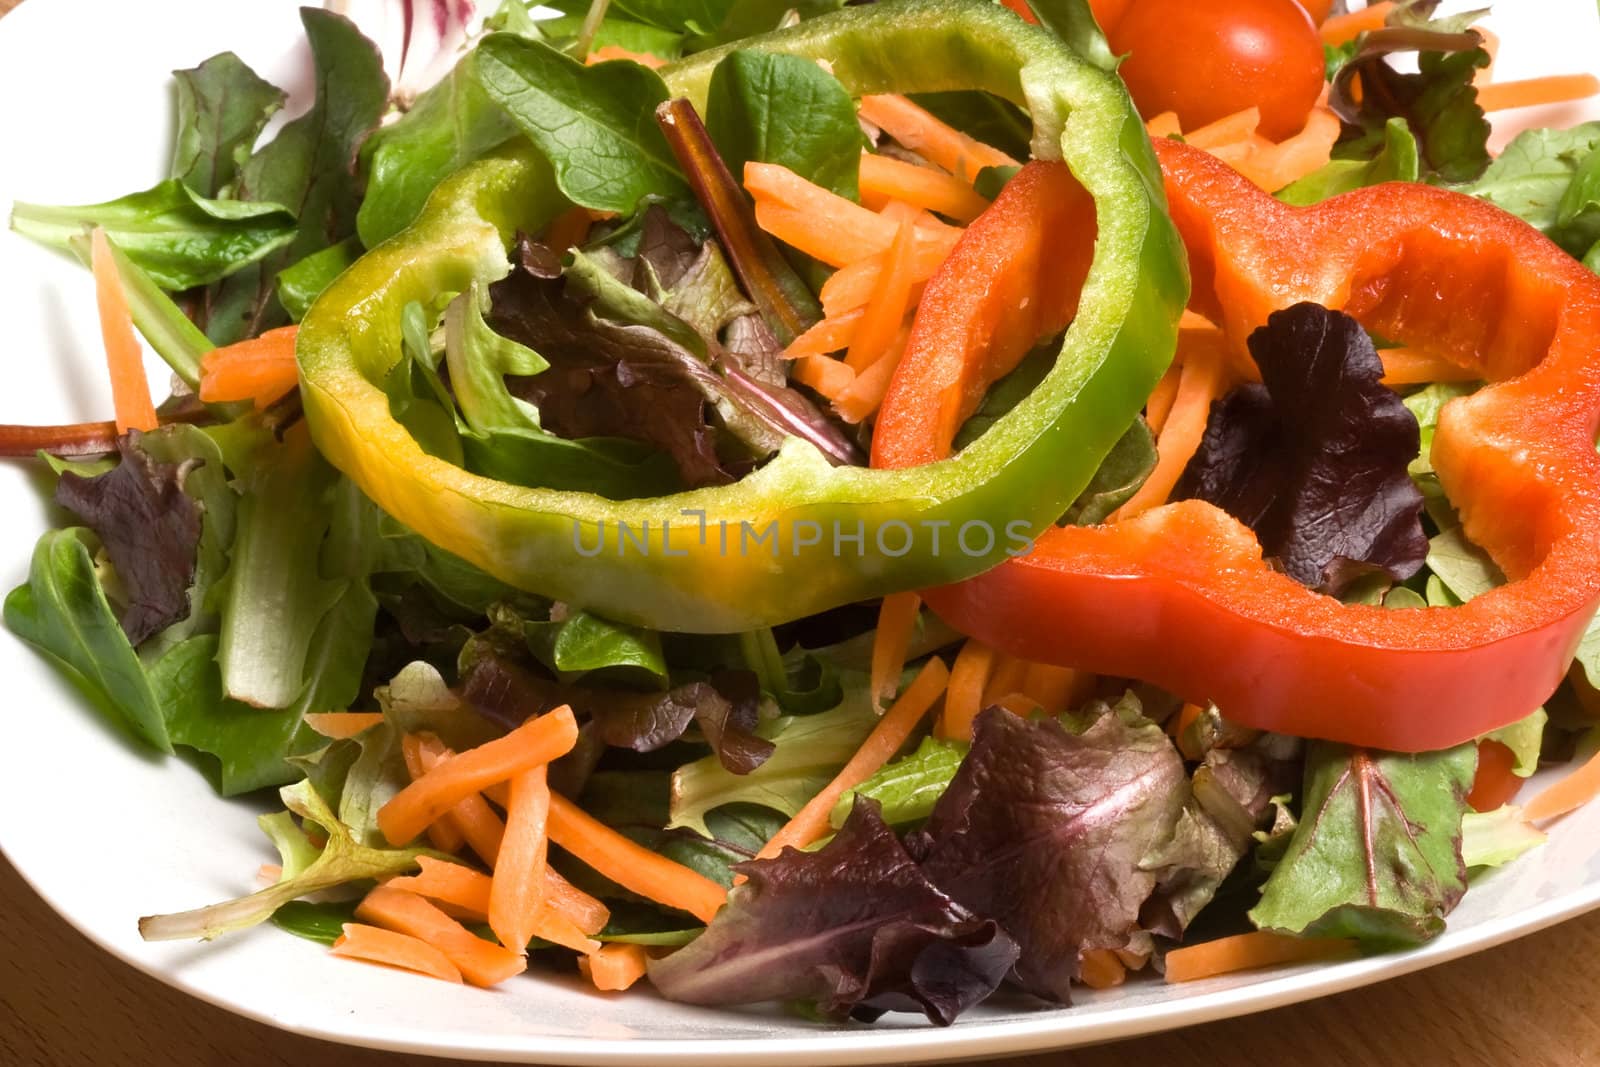 nice bowl of salad greens bright and colorful